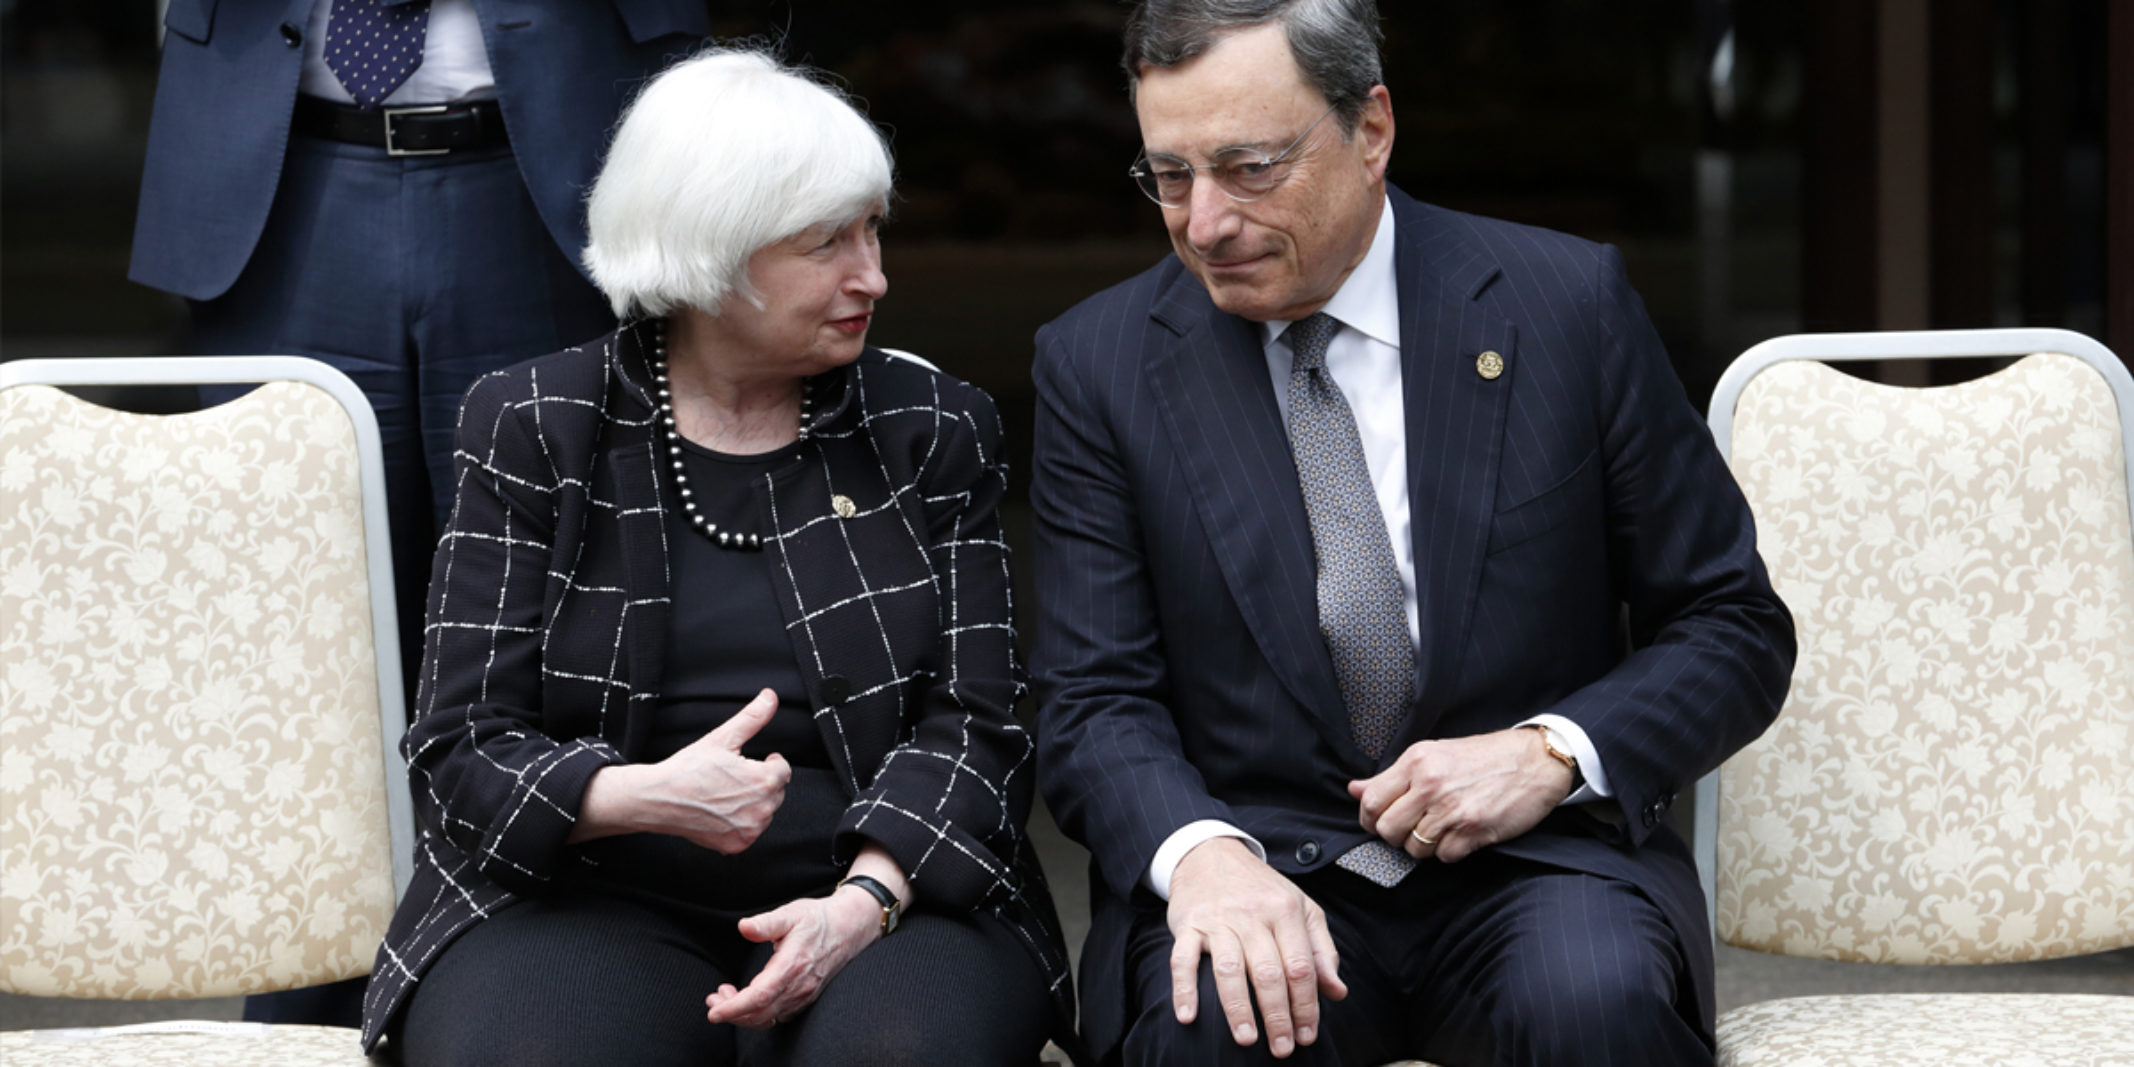 Janet Yellen Talking to another member of the federal Reserve